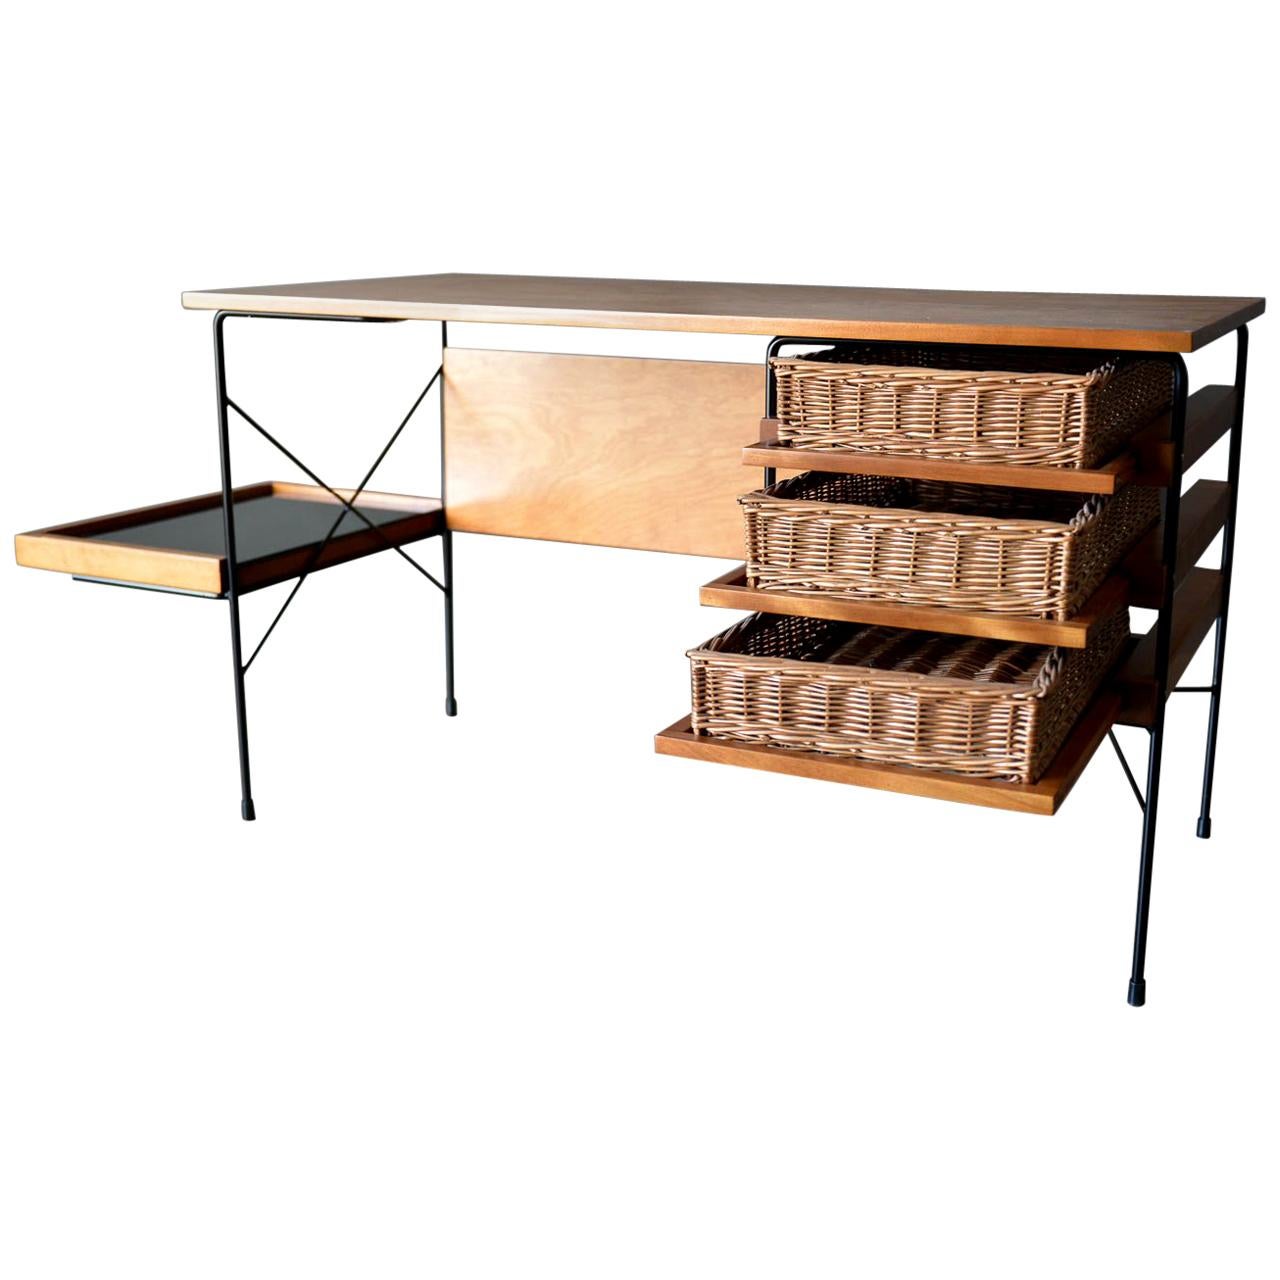 Maple and Iron Desk by Dorothy Schindele for Modern Color, circa 1950